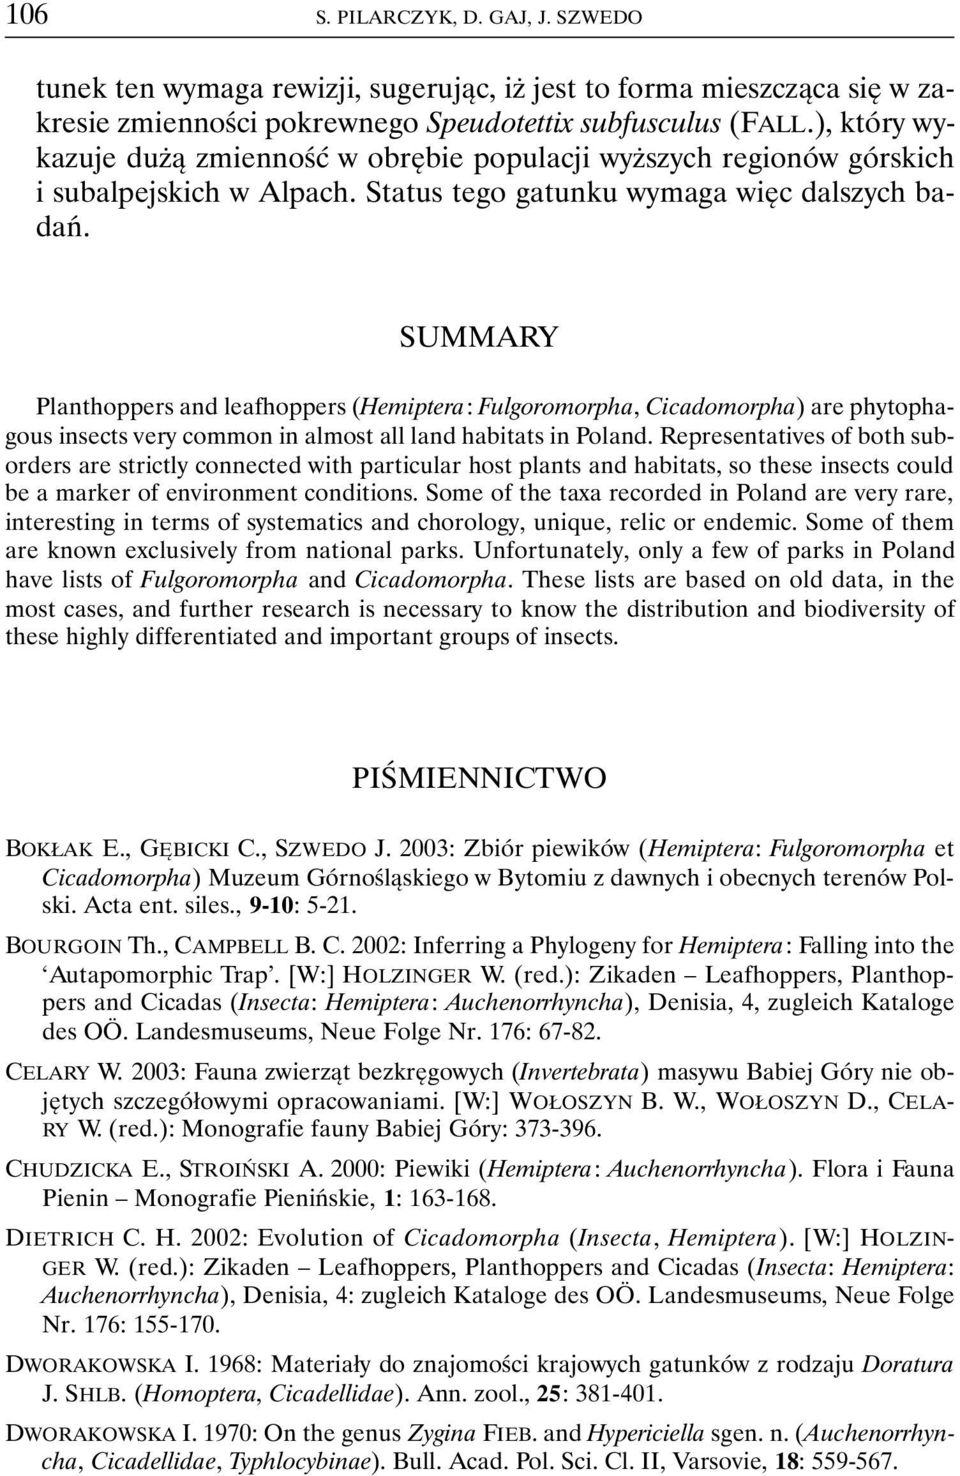 SUMMARY Planthoppers and leafhoppers (Hemiptera: Fulgoromorpha, Cicadomorpha) are phytophagous insects very common in almost all land habitats in Poland.